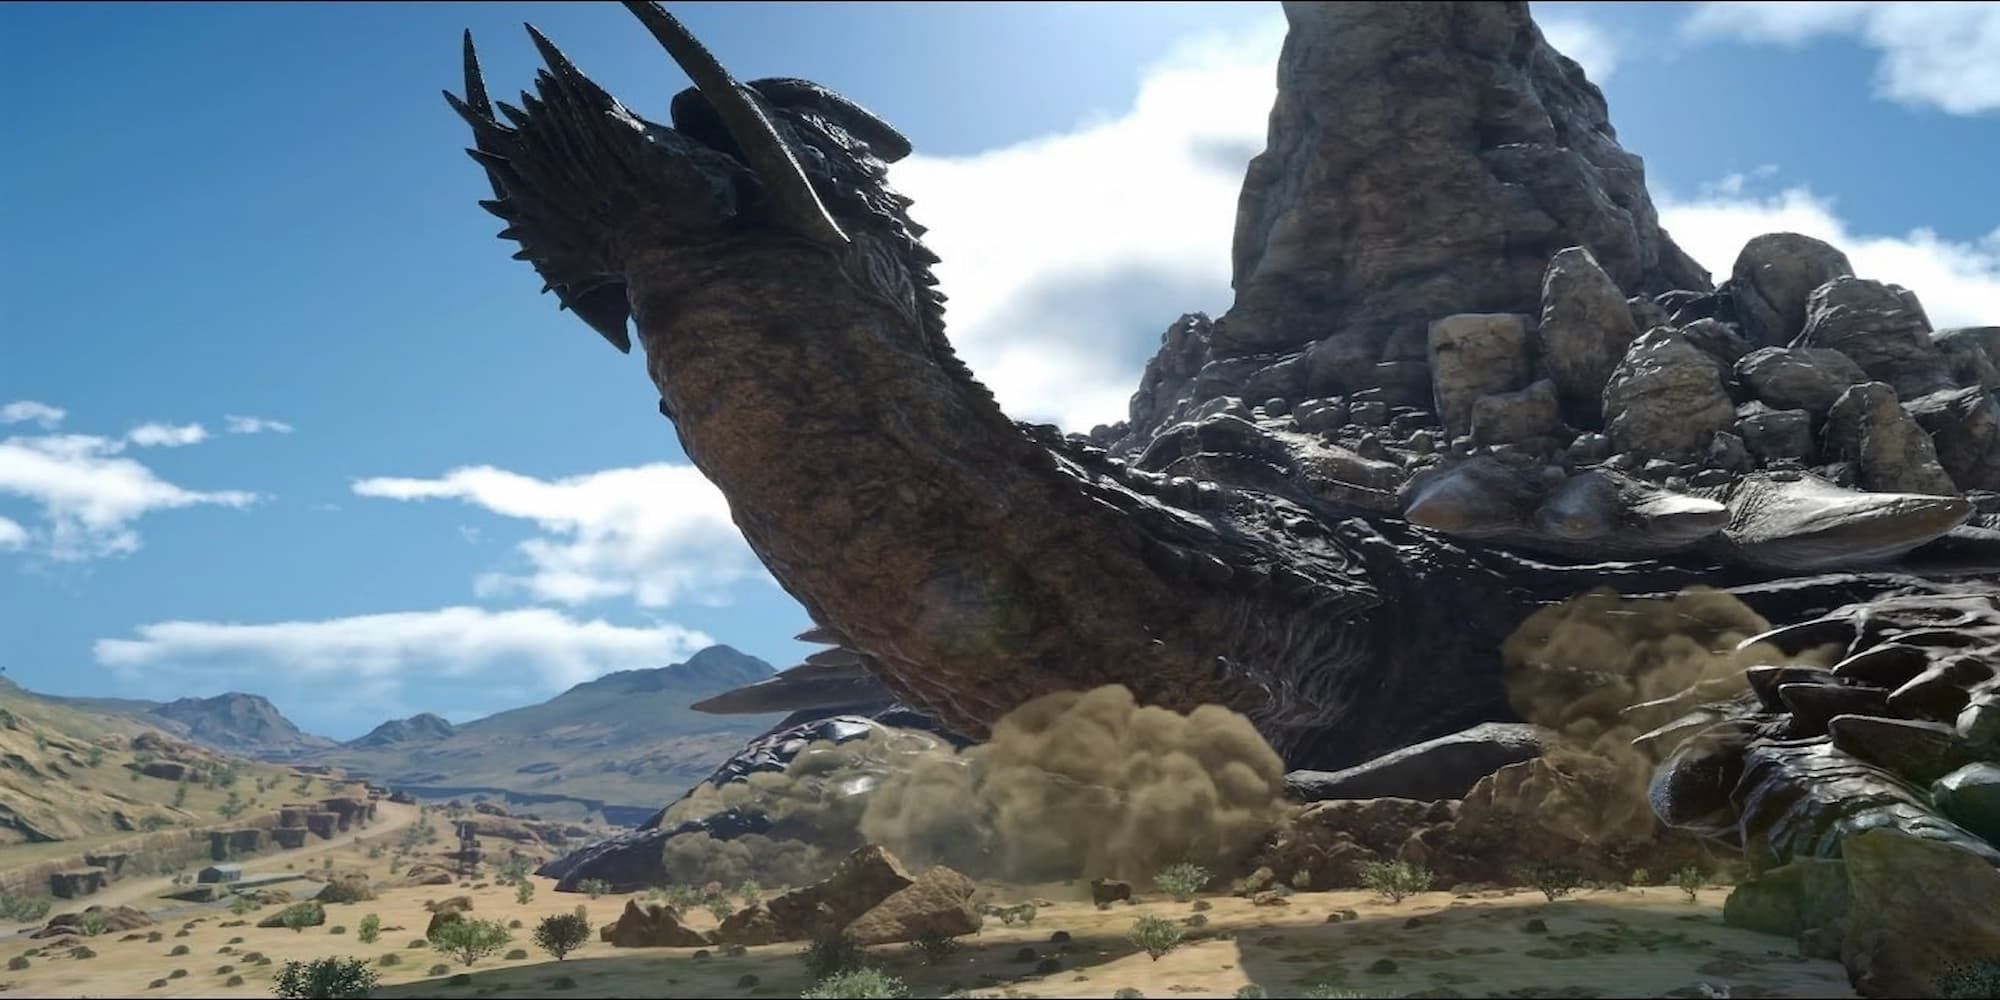 Final Fantasy XV Adamantoise extremely massive head lifted up with entire cliffs on shell walking through desert